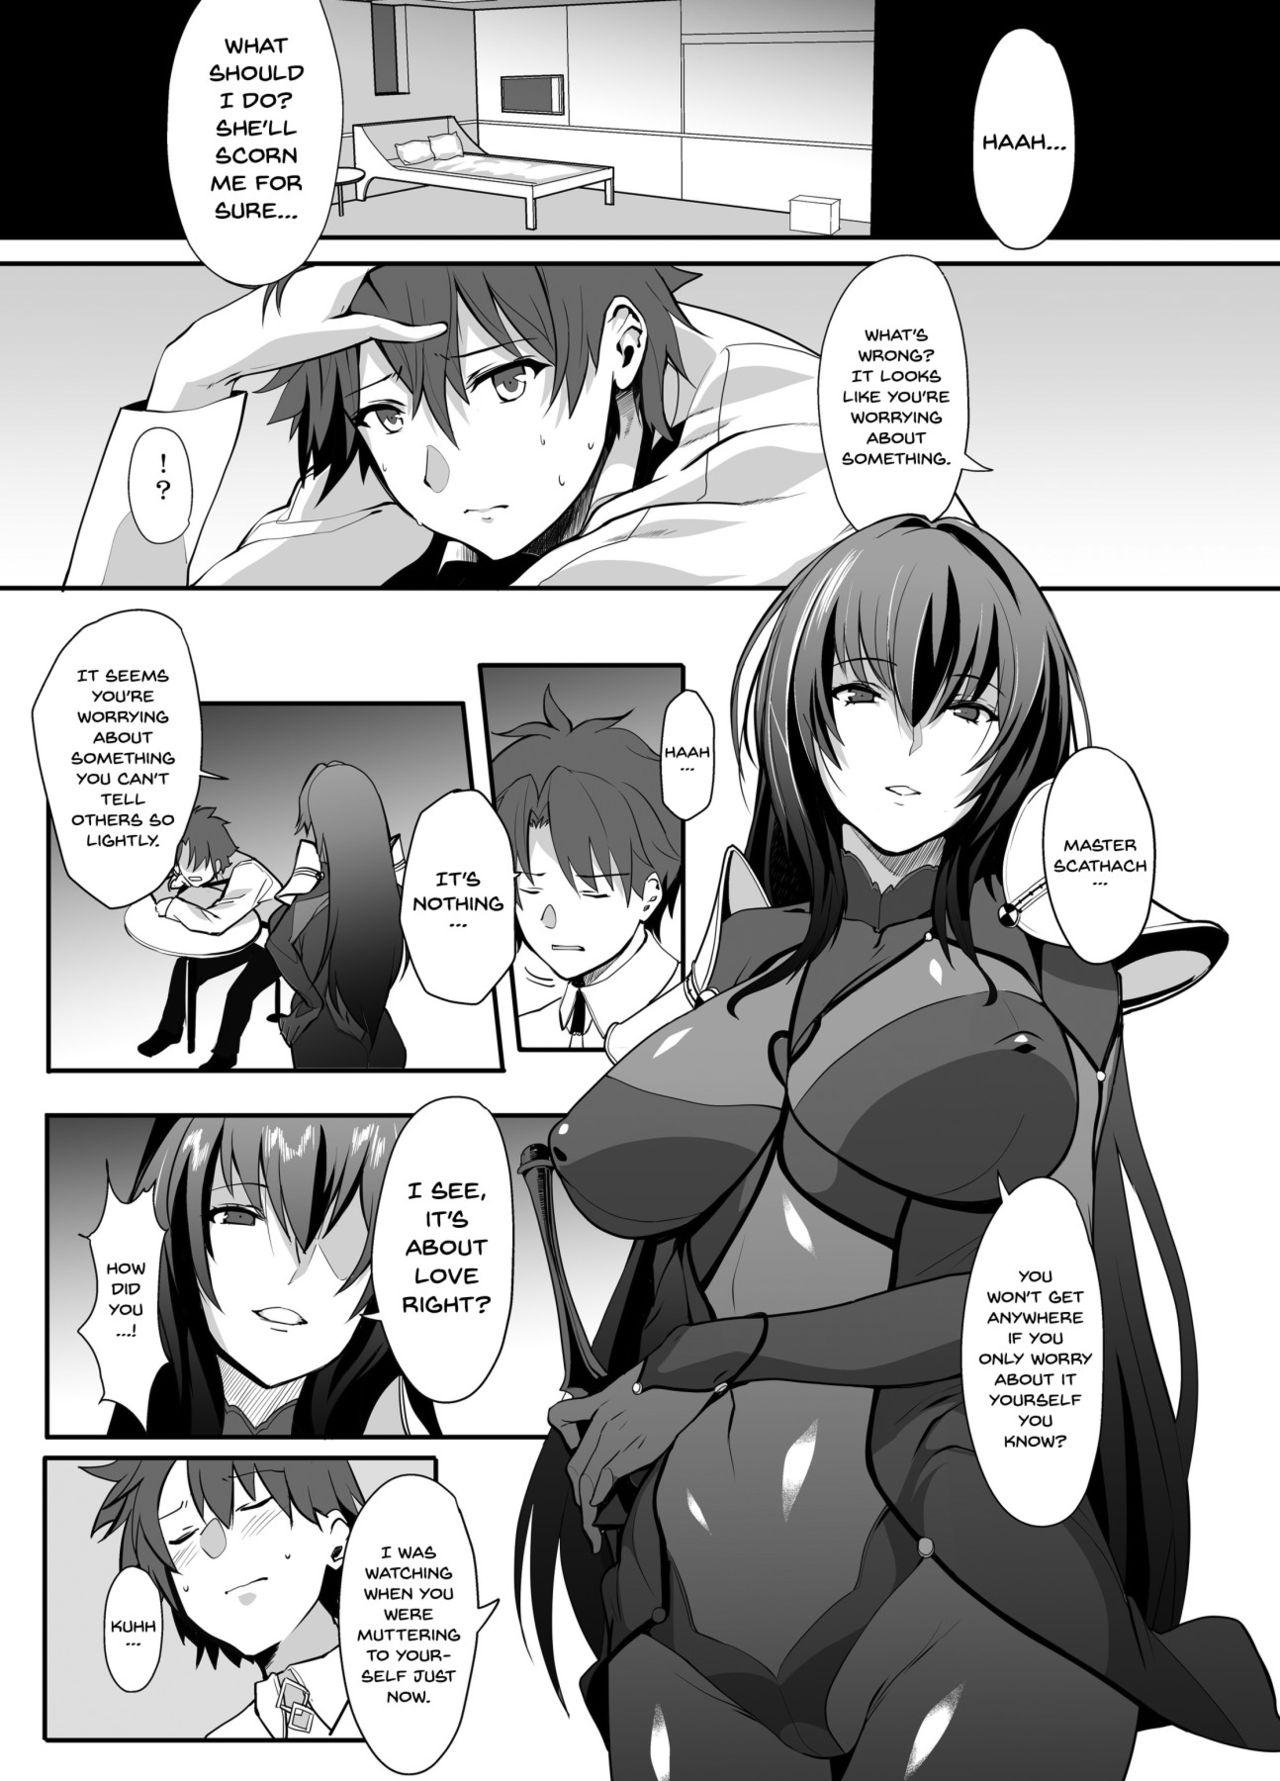 Small Tits Porn Scathach Shishou no Dosukebe Lesson | Lewd Lessons With Teacher Scathach - Fate grand order Gym - Page 2